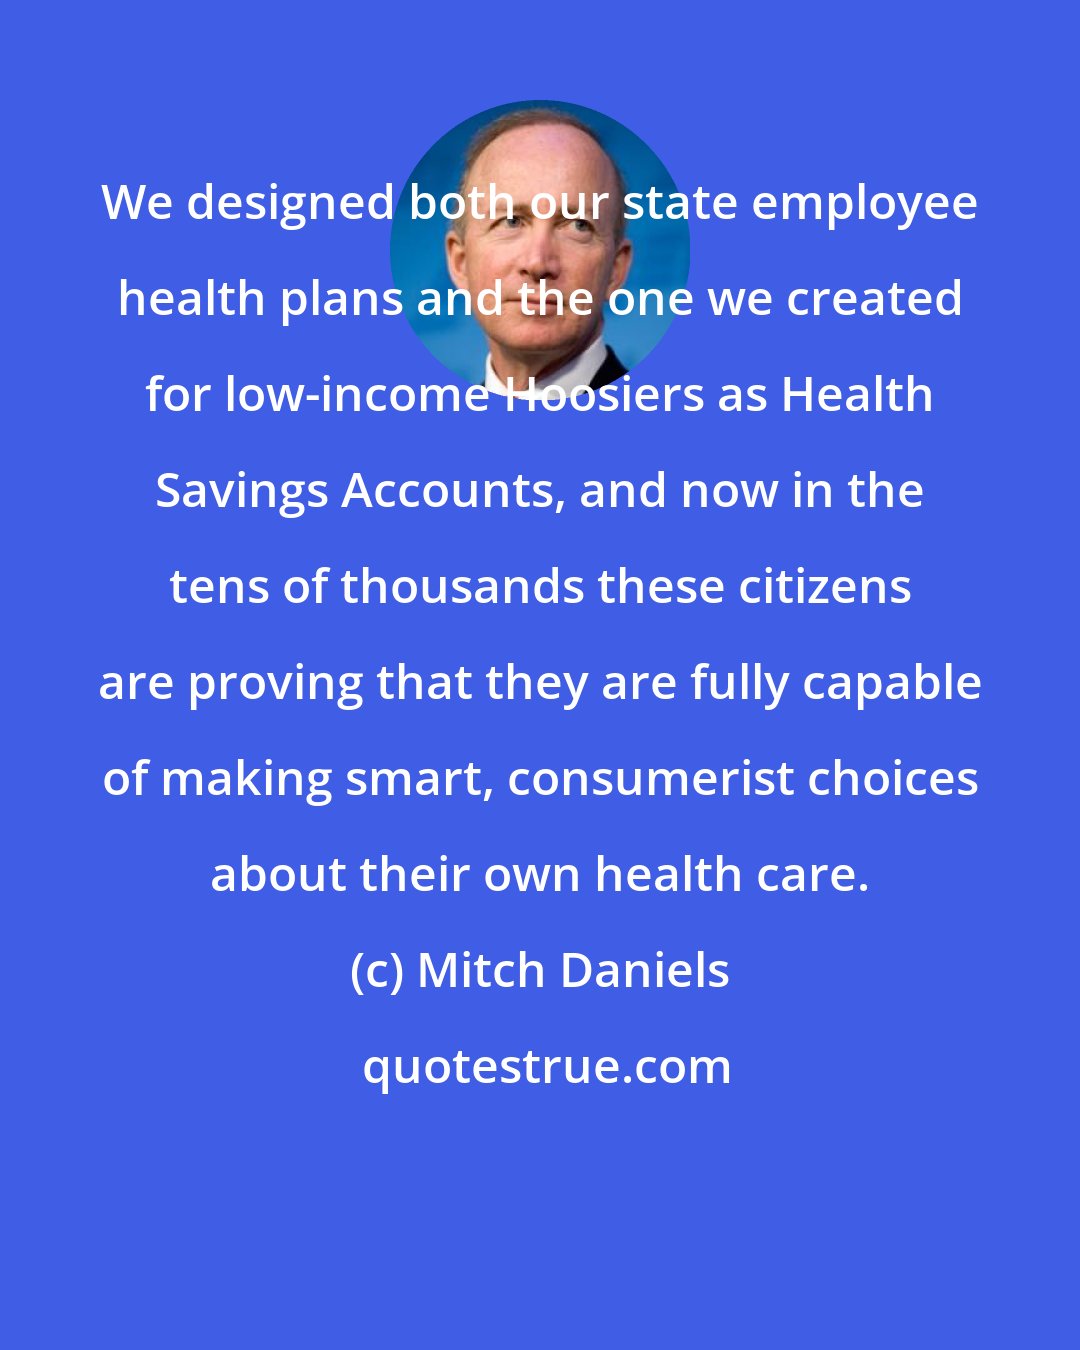 Mitch Daniels: We designed both our state employee health plans and the one we created for low-income Hoosiers as Health Savings Accounts, and now in the tens of thousands these citizens are proving that they are fully capable of making smart, consumerist choices about their own health care.